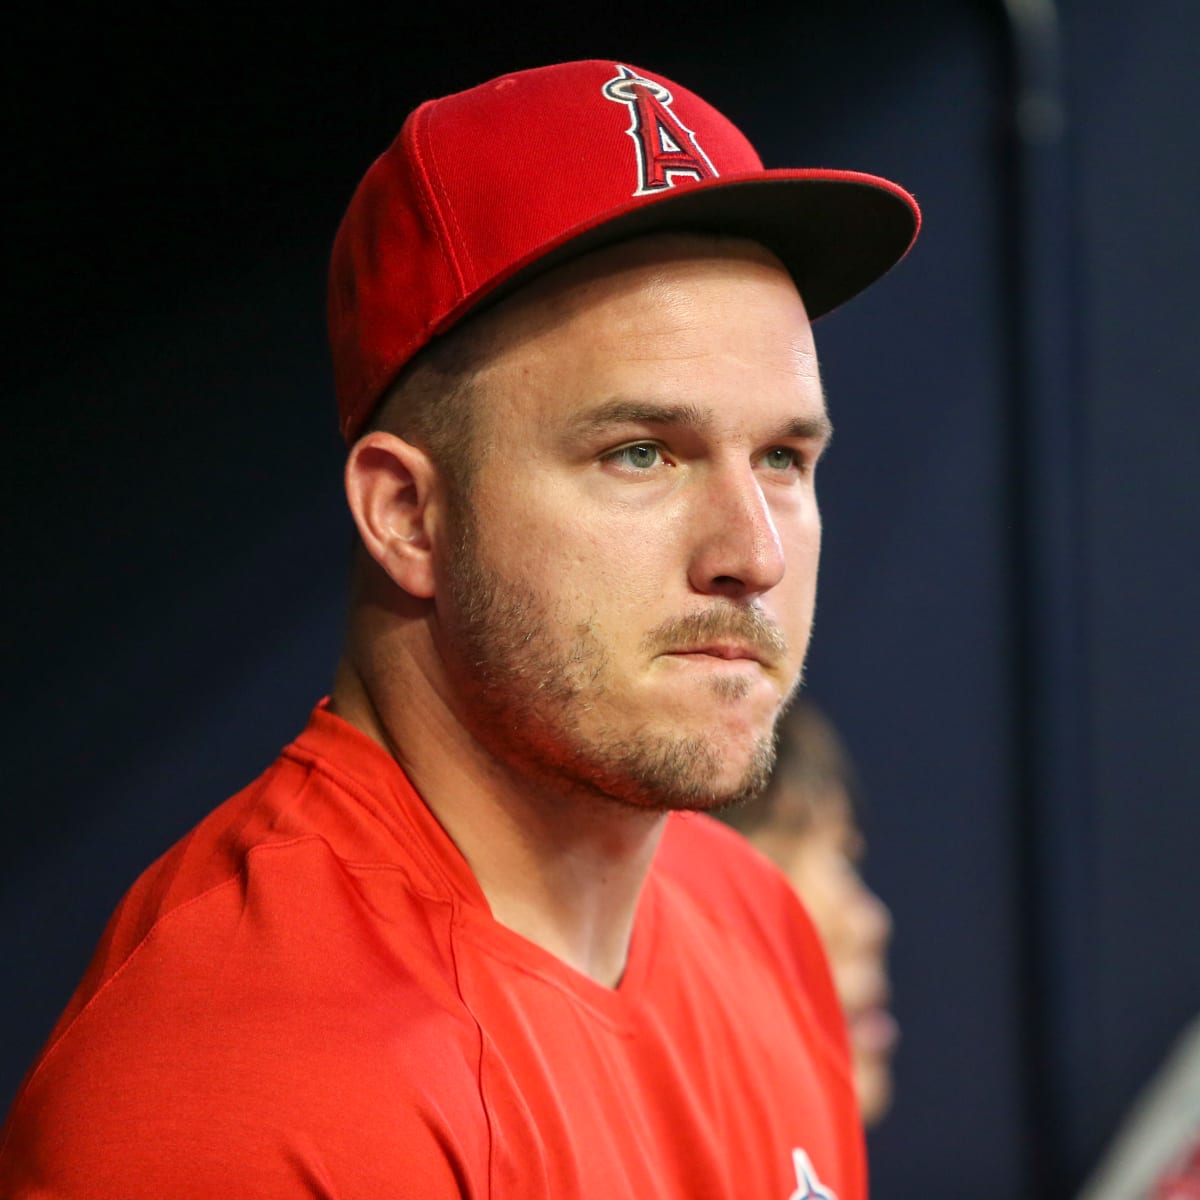 Phillies Acquire Mike Trout! (the dream)